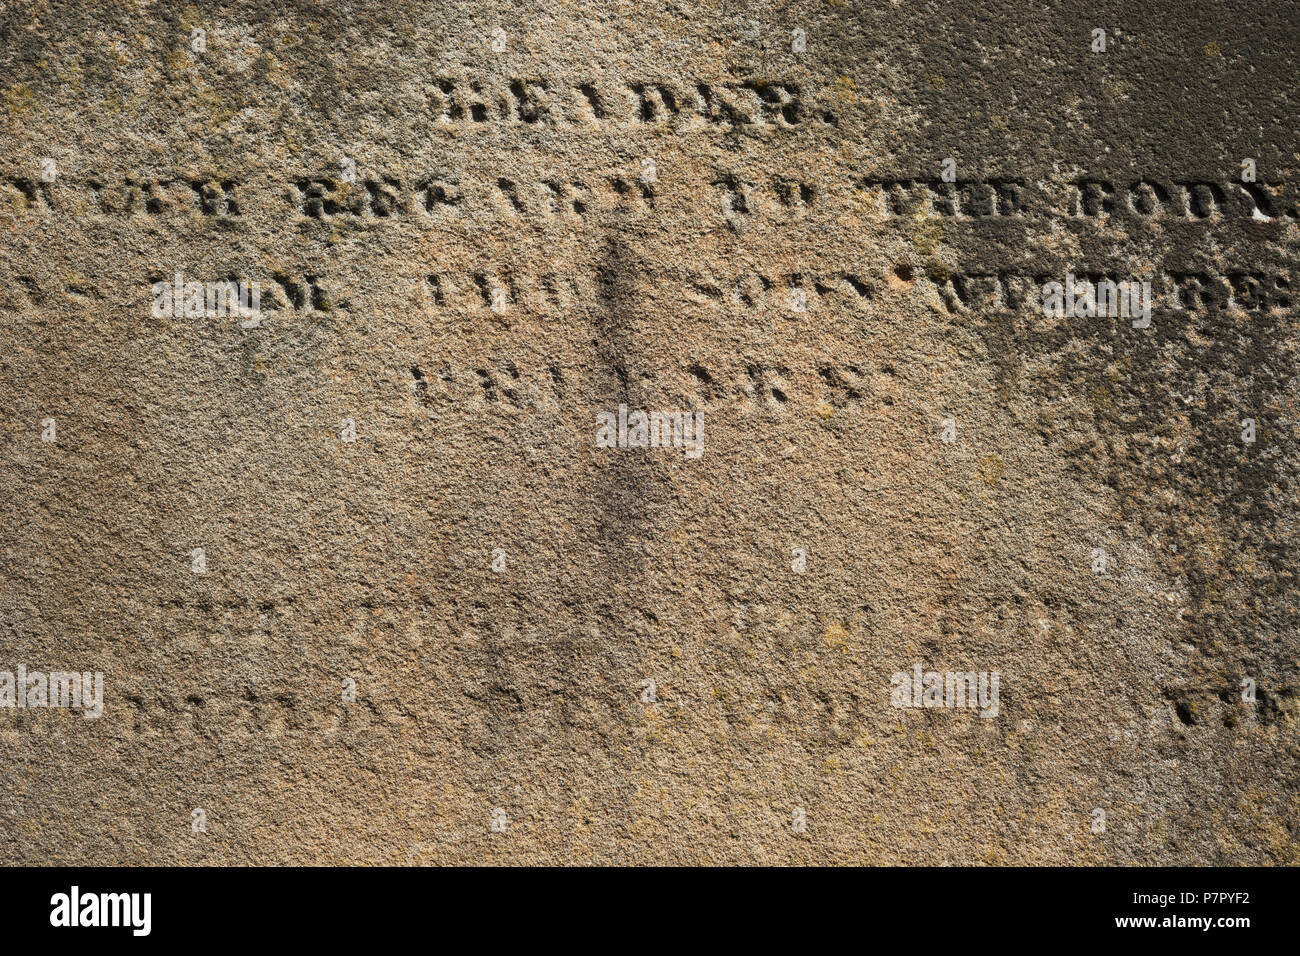 Worn our stone surface with partly readable engraved Latin letters Stock Photo